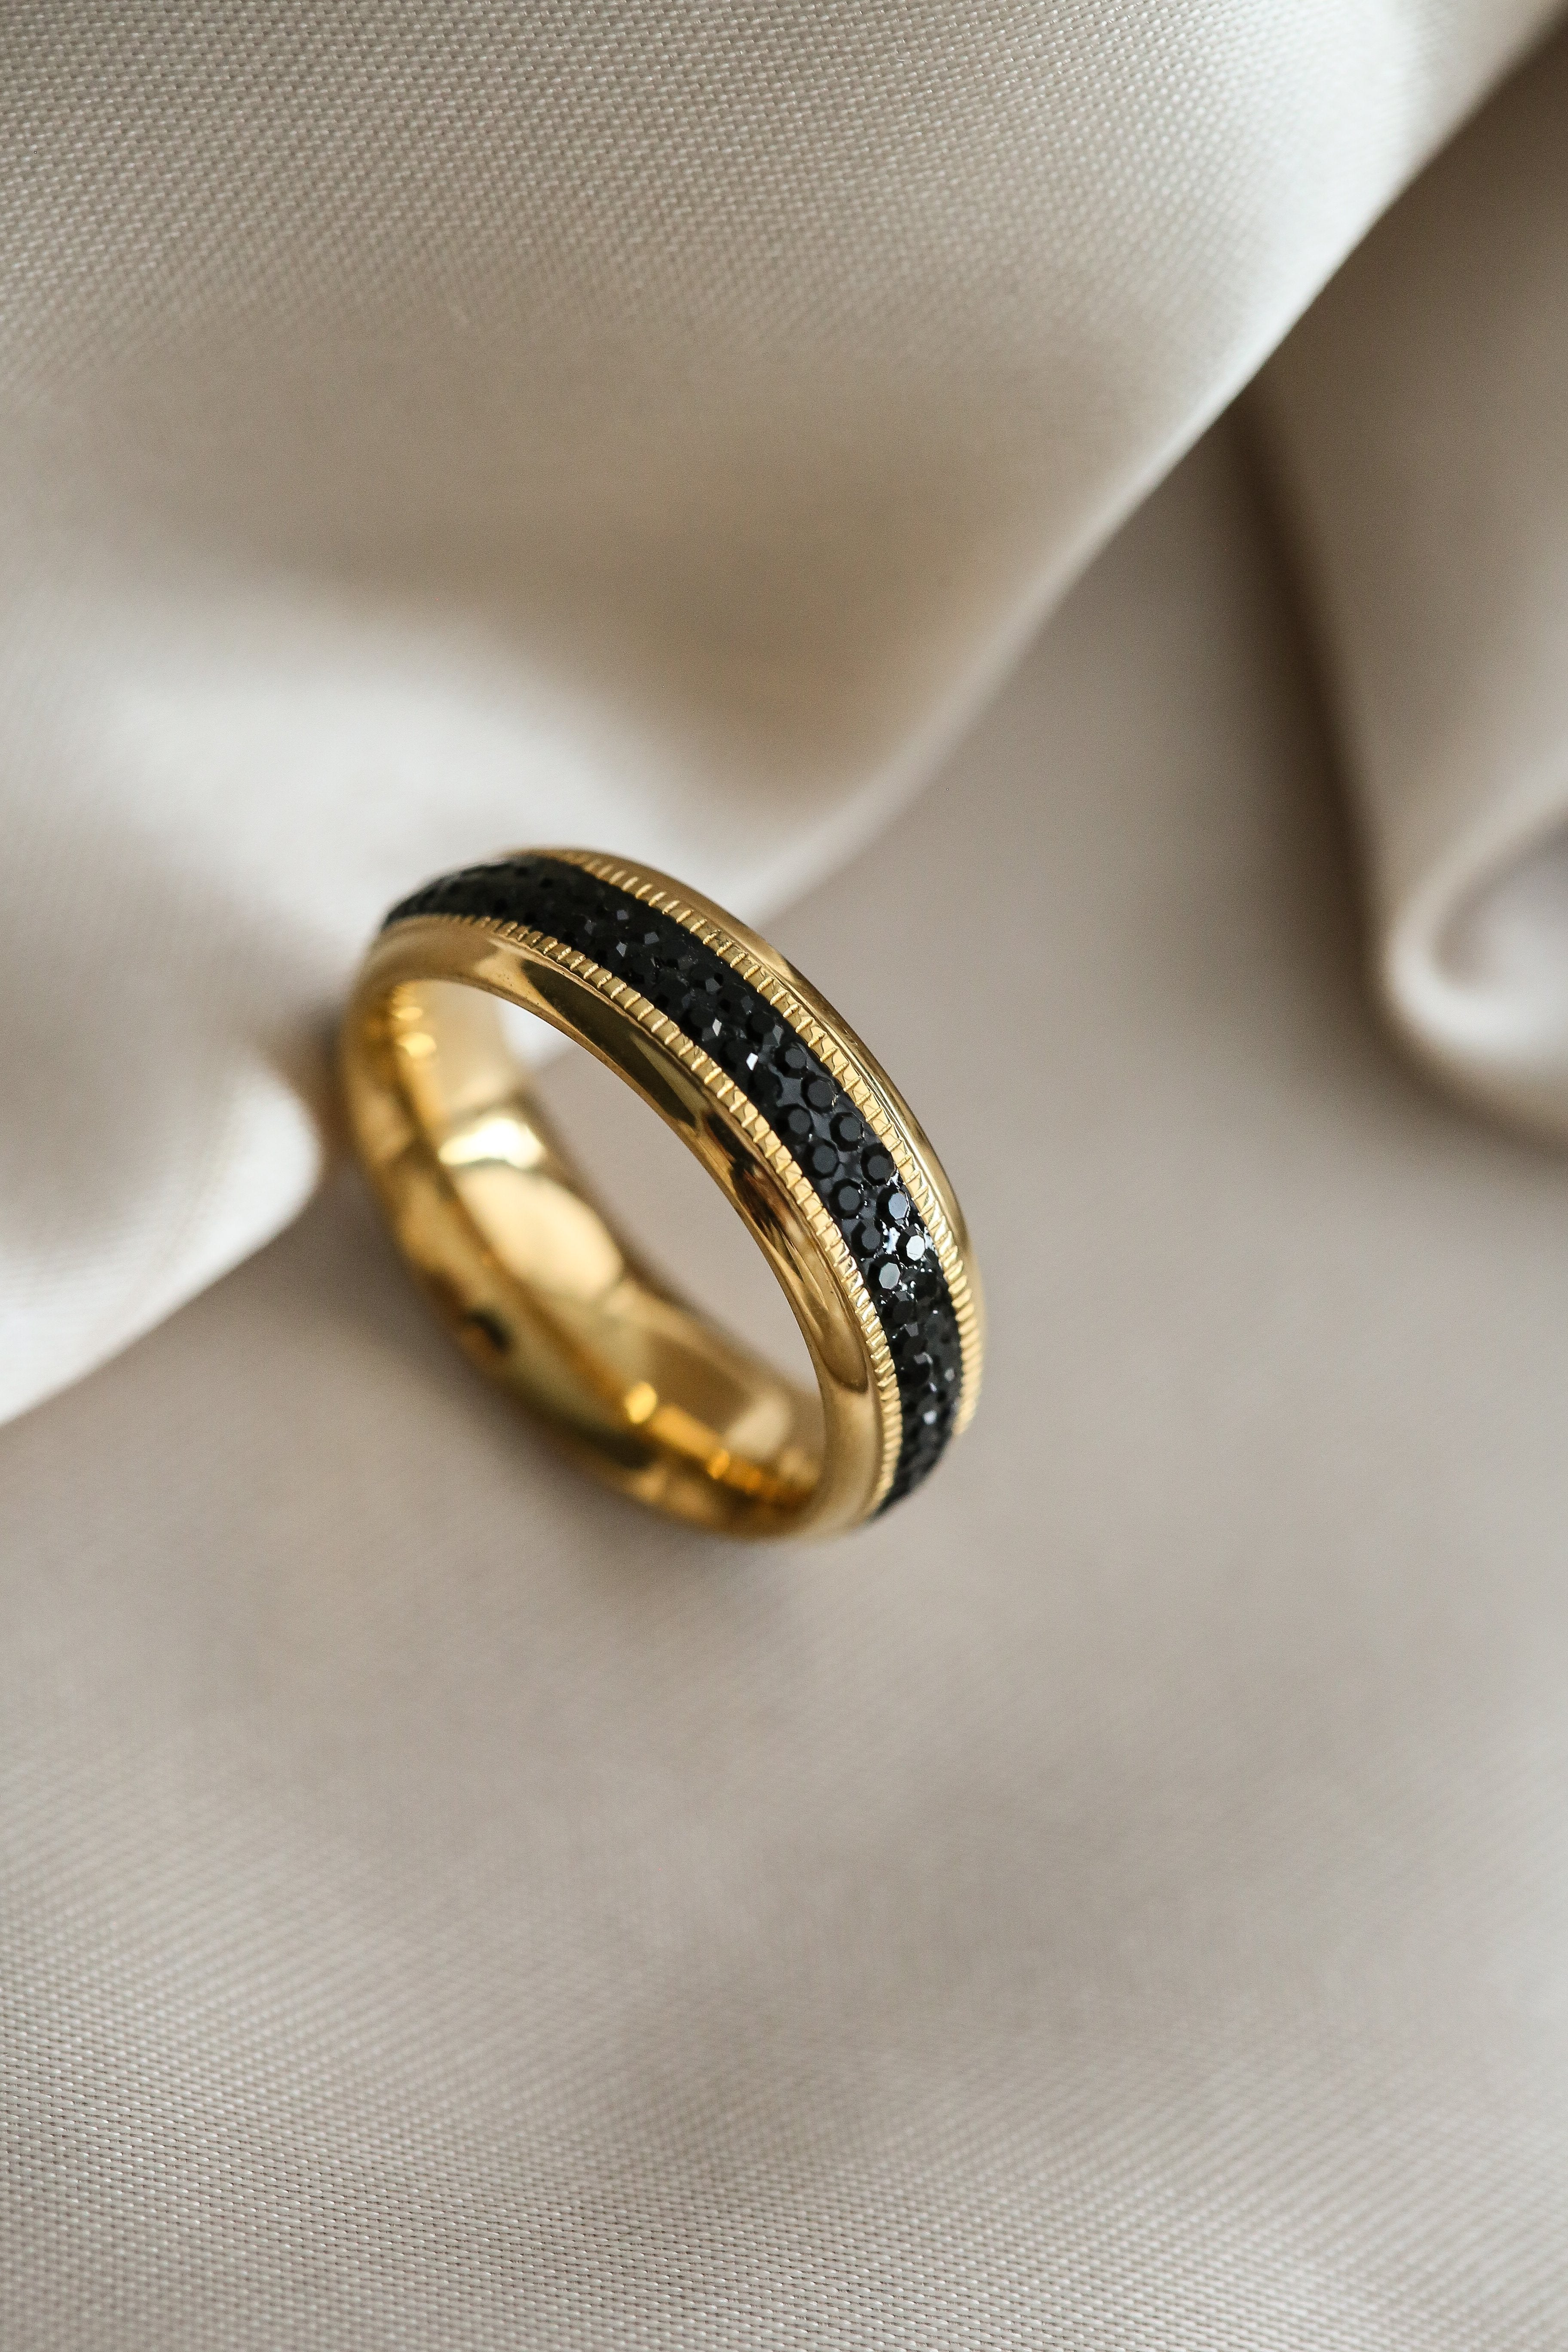 Desirèe Ring - Boutique Minimaliste has waterproof, durable, elegant and vintage inspired jewelry